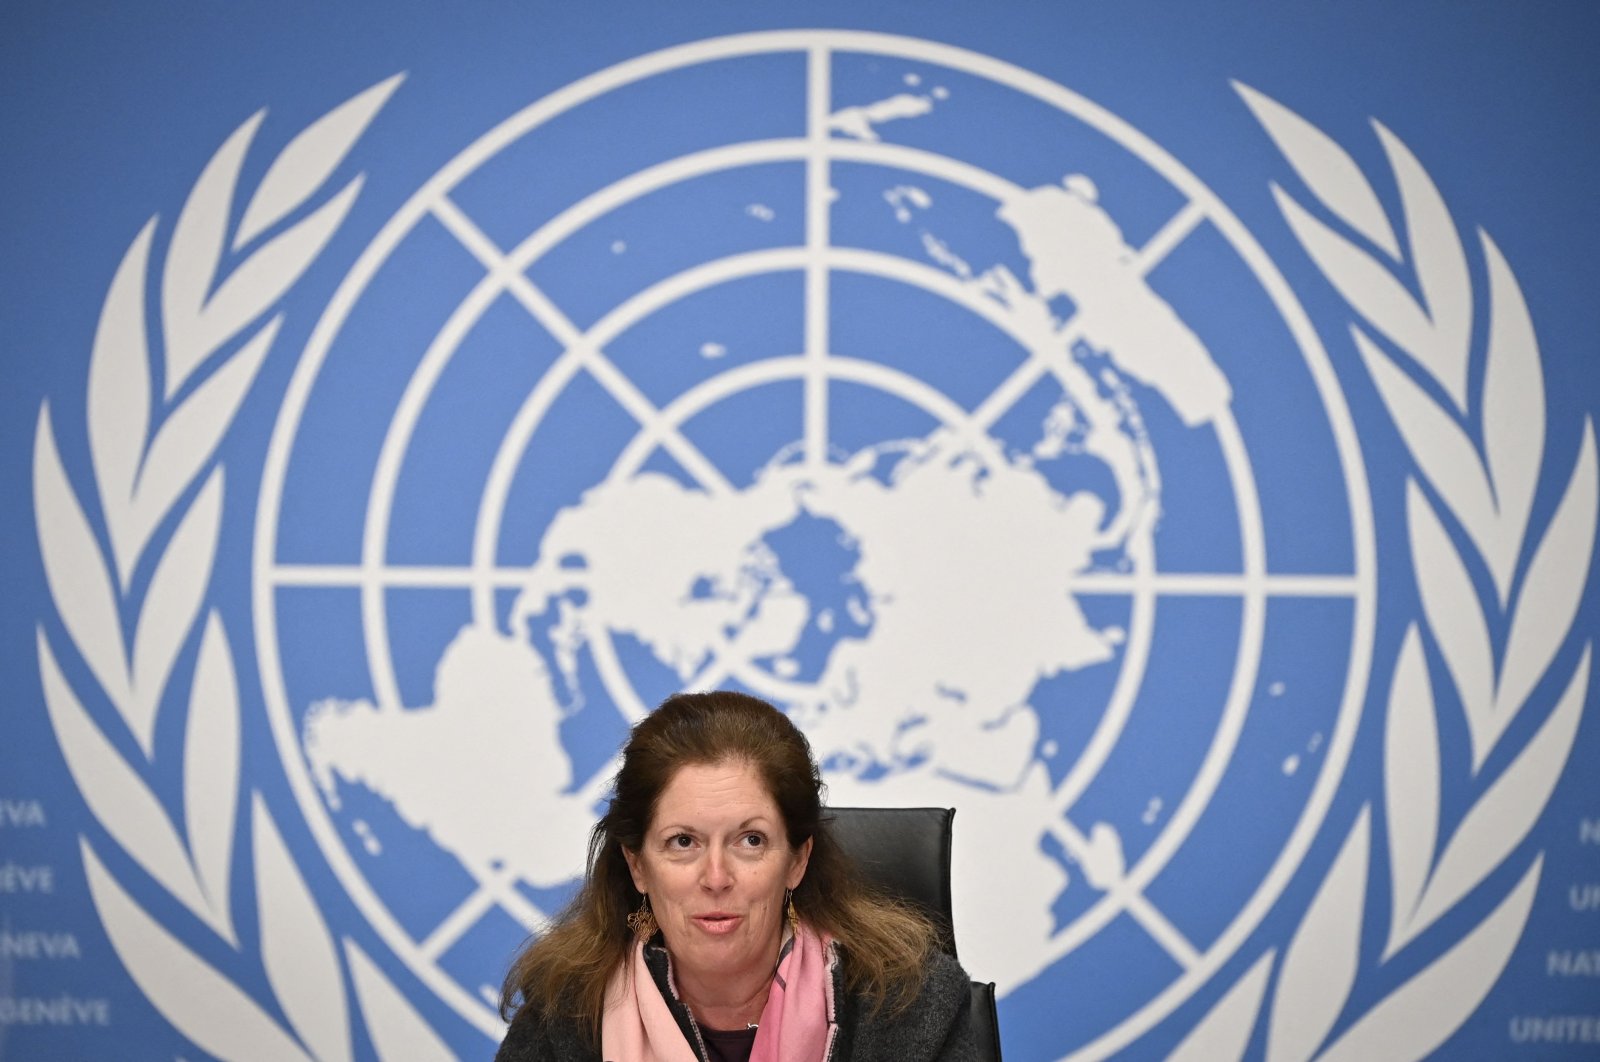 Then-deputy Special Representative of the U.N. Secretary-General for Political Affairs in Libya Stephanie Williams speaks during a press conference in Geneva following the election of a new interim government for Libya during the Libyan Political Dialogue Forum, Feb. 5, 2021. (AFP File Photo)